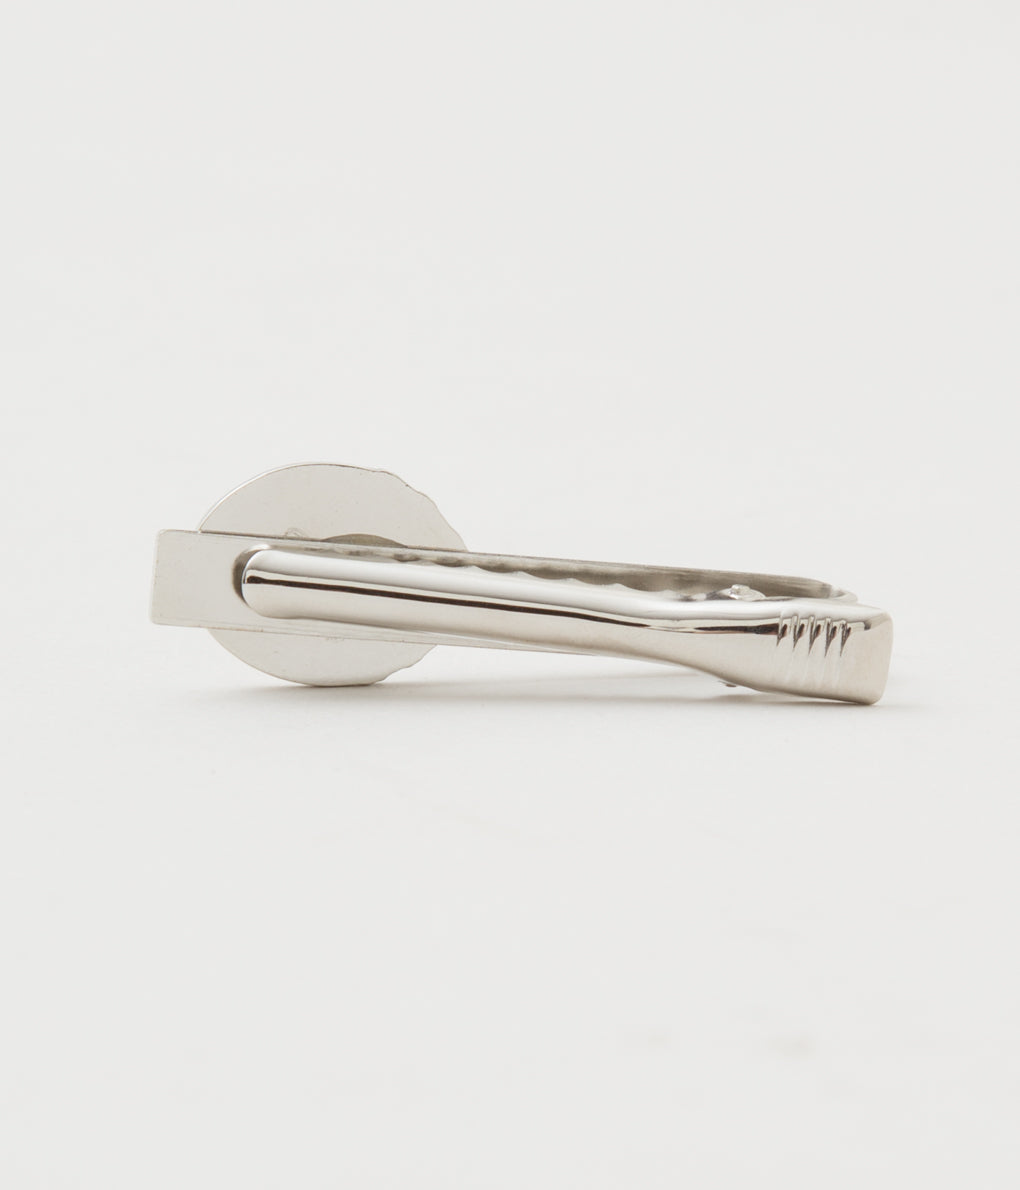 FINE AND DANDY "TIE BARS TENNIS RACKETS"(SILVER)